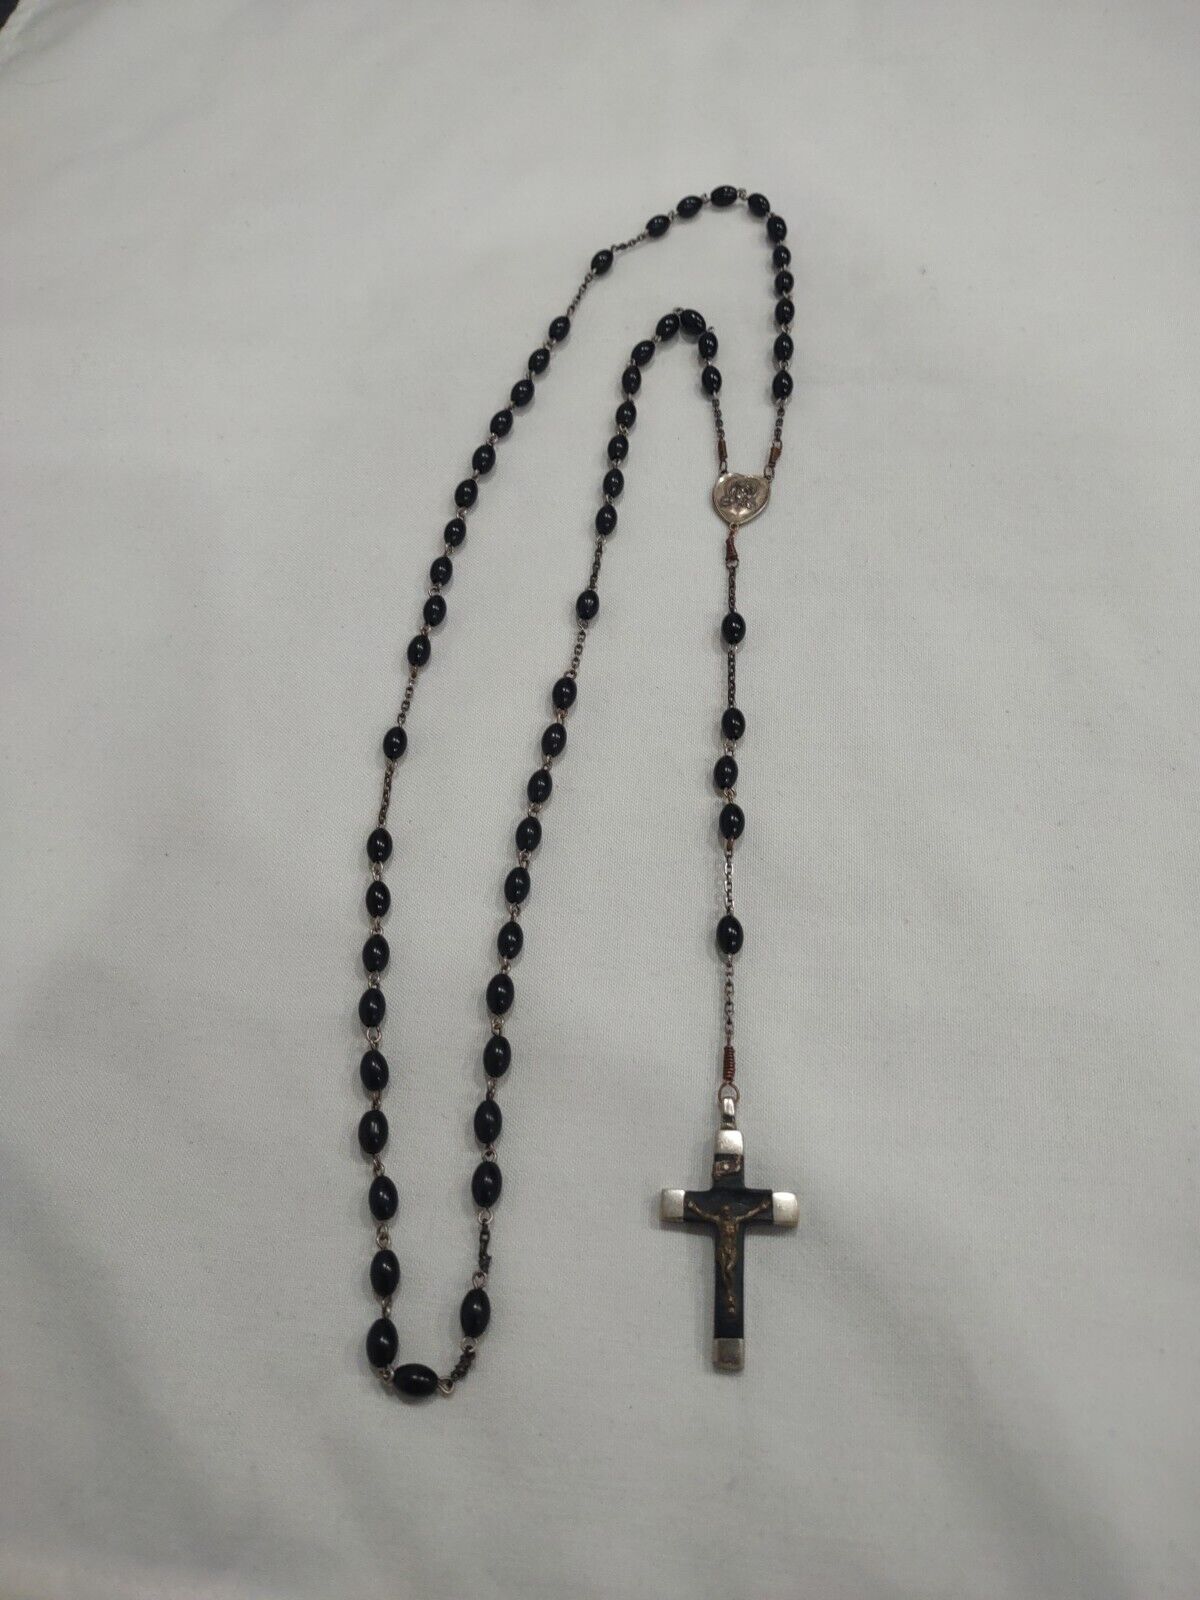 Antique Sterling Silver Center Germany Black Bakelite Bead Rosary Bead Necklace